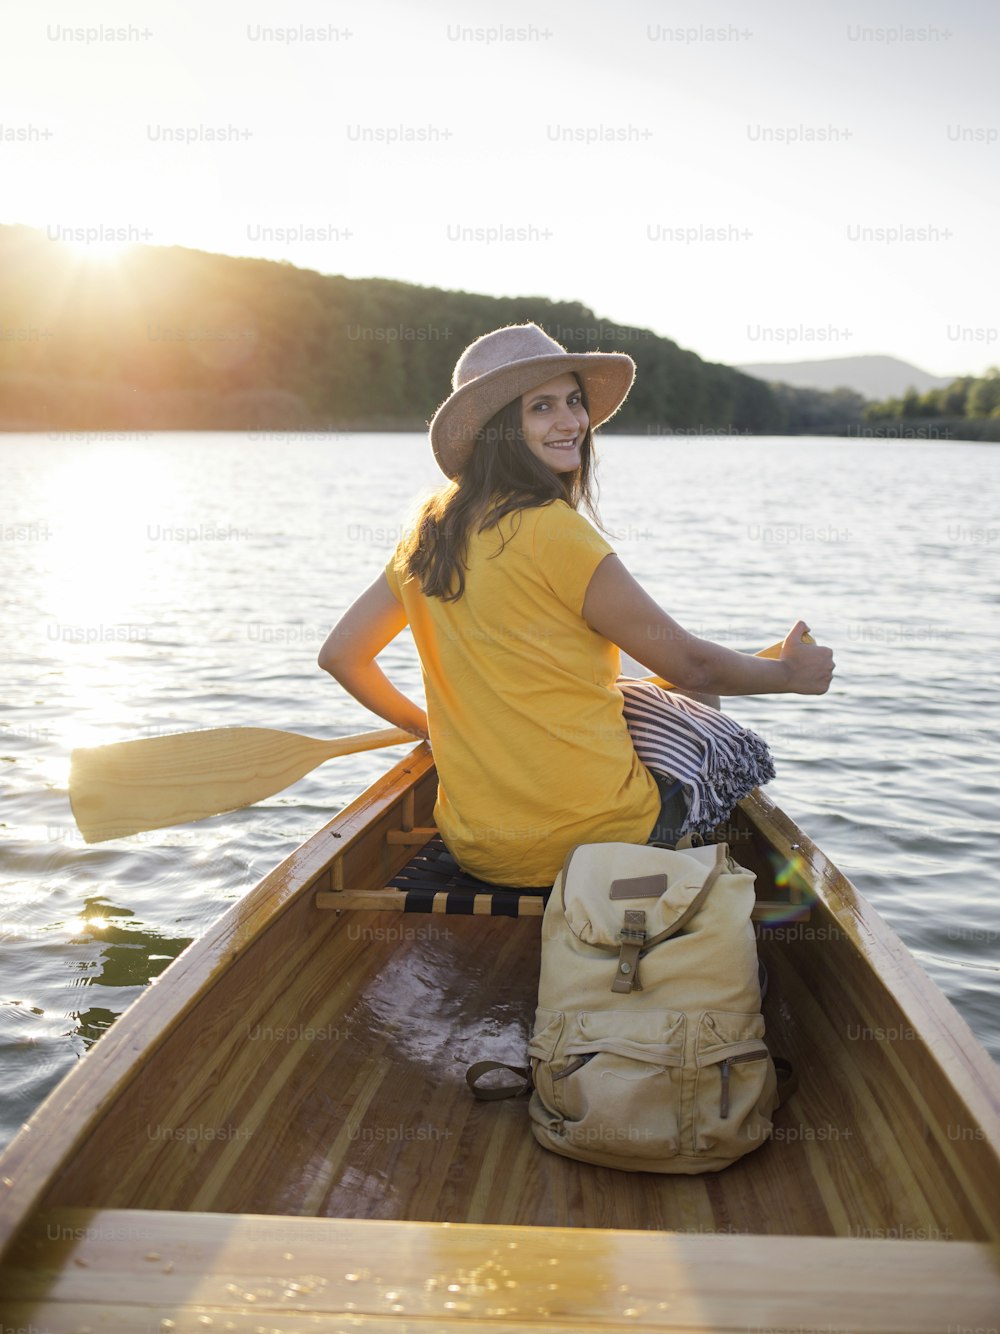 Smiling young woman paddling the canoe on the sunset lake.